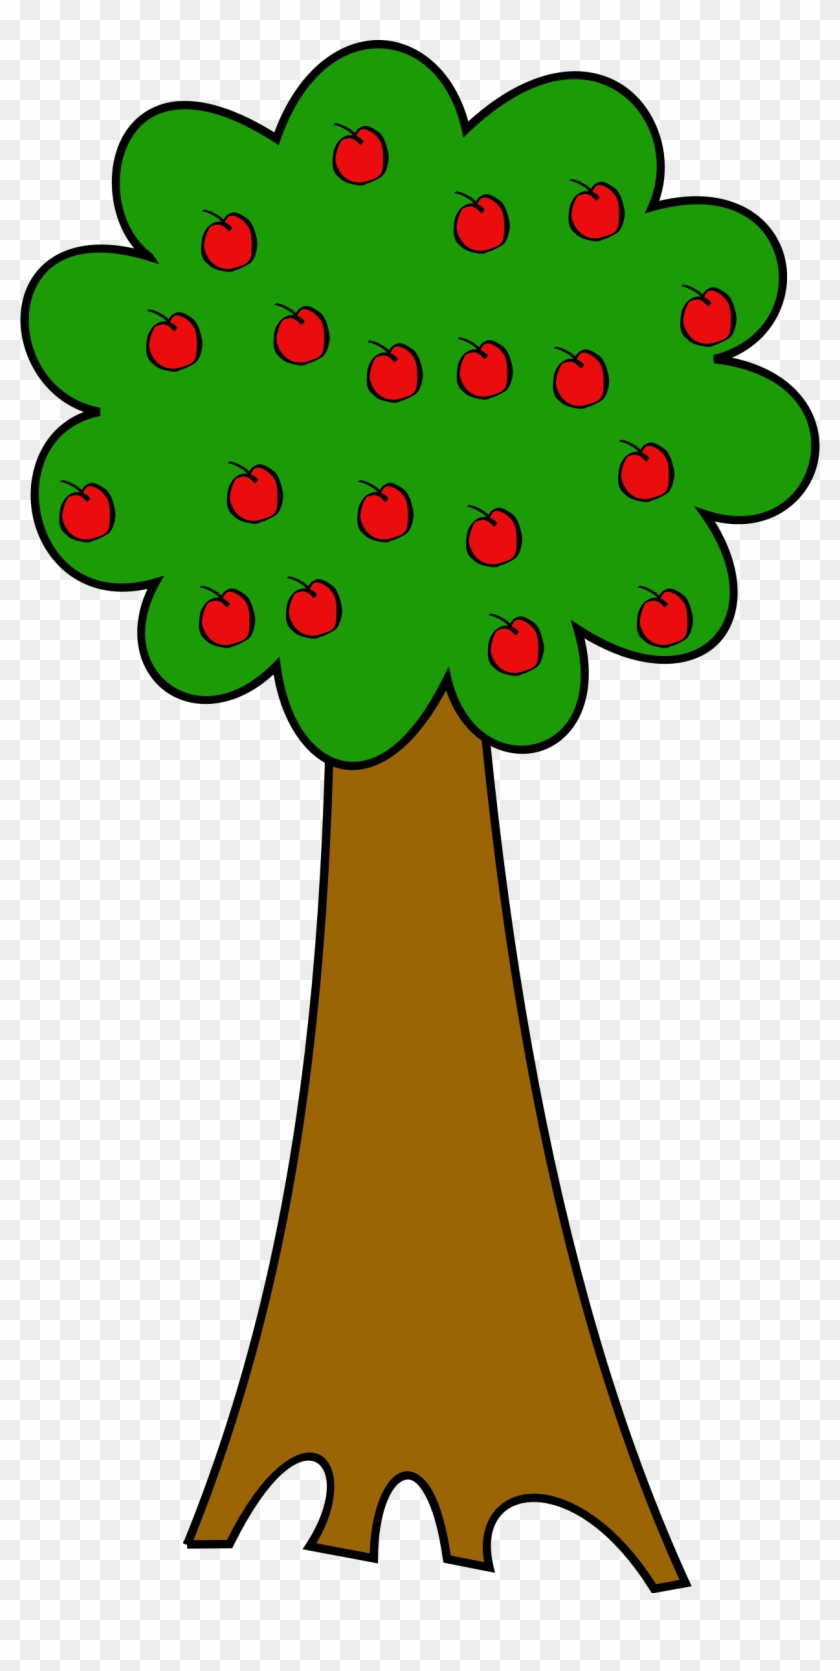 Apple Trees Clip Art - Tall Tree With Fruits , HD Wallpaper & Backgrounds